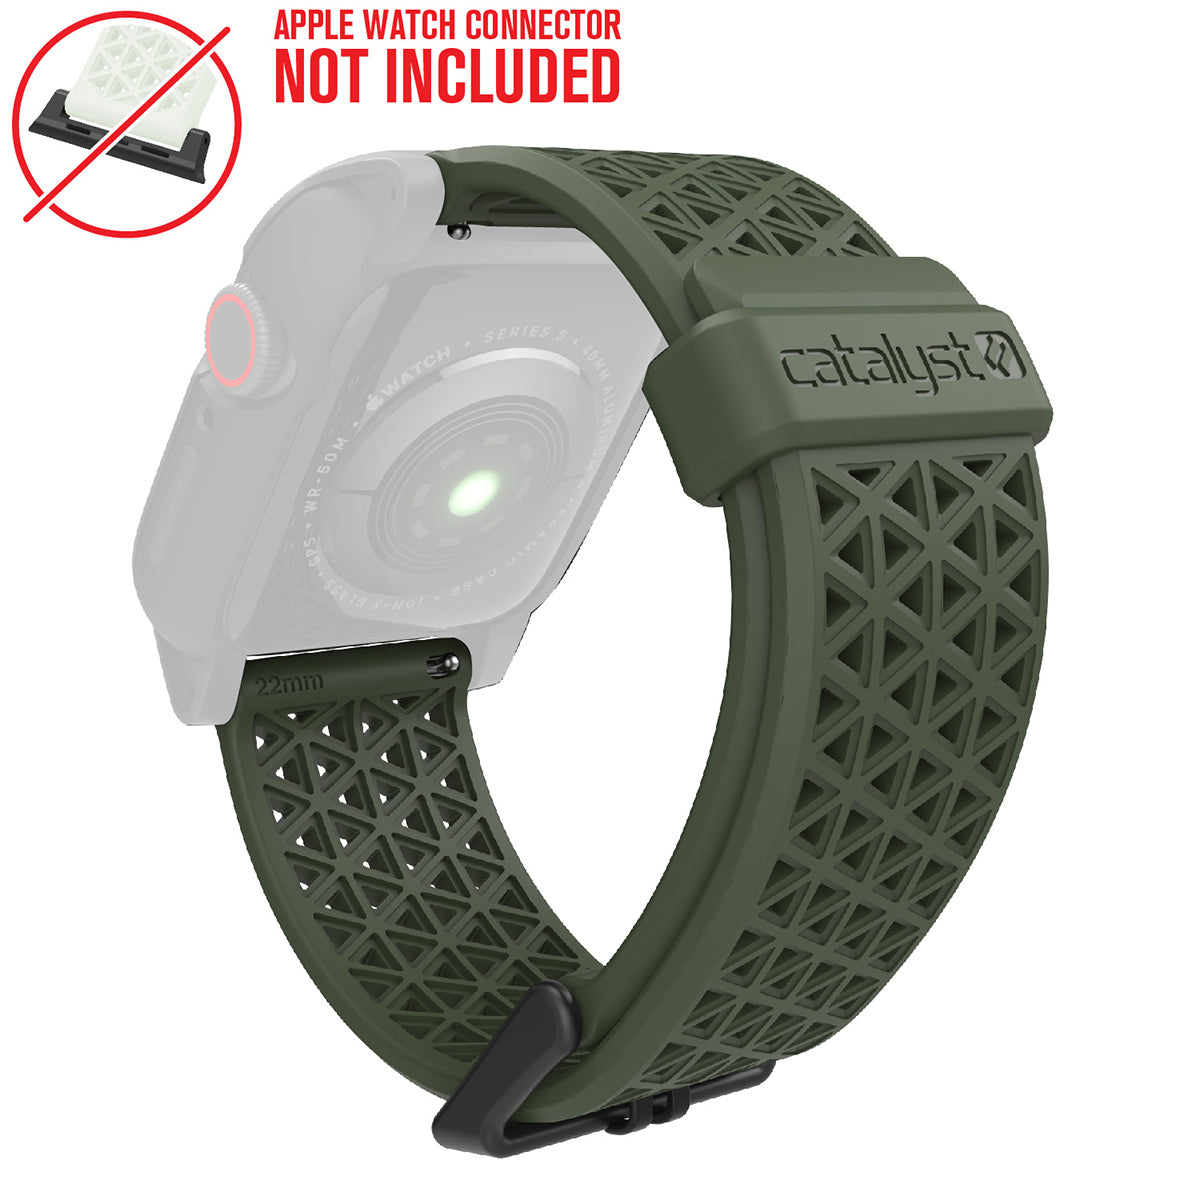 catalyst apple watch series 9 8 7 6 5 4 SE Gen 2 1 38 40 41mm sport band buckle edition catalyst sport band army green text reads apple watch connector not included